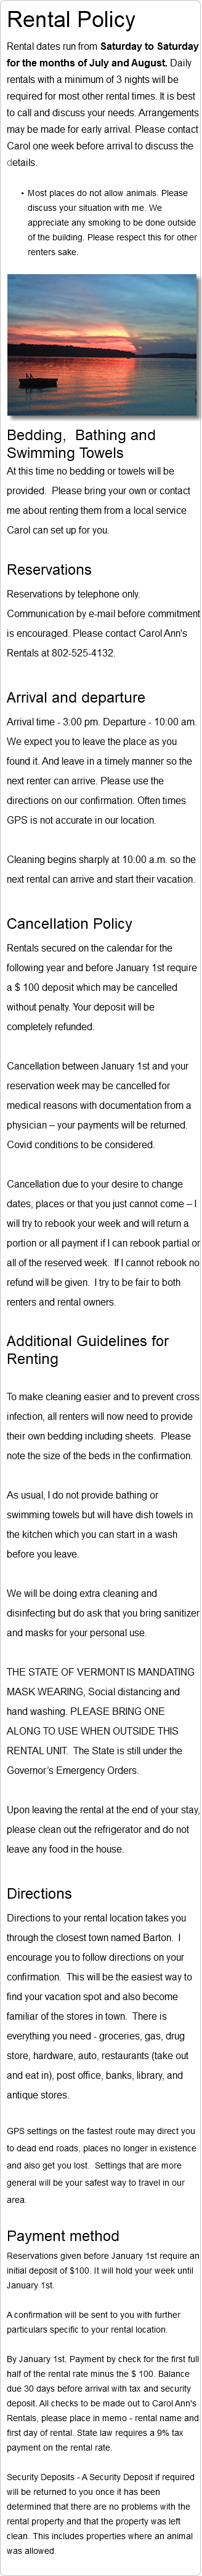 Rental Policy Rental dates run from Saturday to Saturday for the months of July and August. Daily rentals with a minimum of 3 nights will be required for most other rental times. It is best to call and discuss your needs. Arrangements may be made for early arrival. Please contact Carol one week before arrival to discuss the details. Most places do not allow animals. Please discuss your situation with me. We appreciate any smoking to be done outside of the building. Please respect this for other renters sake. ﷯ Bedding, Bathing and Swimming Towels At this time no bedding or towels will be provided. Please bring your own or contact me about renting them from a local service Carol can set up for you. Reservations Reservations by telephone only. Communication by e-mail before commitment is encouraged. Please contact Carol Ann's Rentals at 802-525-4132. Arrival and departure Arrival time - 3:00 pm. Departure - 10:00 am. We expect you to leave the place as you found it. And leave in a timely manner so the next renter can arrive. Please use the directions on our confirmation. Often times GPS is not accurate in our location. Cleaning begins sharply at 10:00 a.m. so the next rental can arrive and start their vacation. Cancellation Policy Rentals secured on the calendar for the following year and before January 1st require a $ 100 deposit which may be cancelled without penalty. Your deposit will be completely refunded. Cancellation between January 1st and your reservation week may be cancelled for medical reasons with documentation from a physician – your payments will be returned. Covid conditions to be considered. Cancellation due to your desire to change dates, places or that you just cannot come – I will try to rebook your week and will return a portion or all payment if I can rebook partial or all of the reserved week. If I cannot rebook no refund will be given. I try to be fair to both renters and rental owners. Additional Guidelines for Renting To make cleaning easier and to prevent cross infection, all renters will now need to provide their own bedding including sheets. Please note the size of the beds in the confirmation. As usual, I do not provide bathing or swimming towels but will have dish towels in the kitchen which you can start in a wash before you leave. We will be doing extra cleaning and disinfecting but do ask that you bring sanitizer and masks for your personal use. THE STATE OF VERMONT IS MANDATING MASK WEARING, Social distancing and hand washing. PLEASE BRING ONE ALONG TO USE WHEN OUTSIDE THIS RENTAL UNIT. The State is still under the Governor’s Emergency Orders. Upon leaving the rental at the end of your stay, please clean out the refrigerator and do not leave any food in the house. Directions Directions to your rental location takes you through the closest town named Barton. I encourage you to follow directions on your confirmation. This will be the easiest way to find your vacation spot and also become familiar of the stores in town. There is everything you need - groceries, gas, drug store, hardware, auto, restaurants (take out and eat in), post office, banks, library, and antique stores. GPS settings on the fastest route may direct you to dead end roads, places no longer in existence and also get you lost. Settings that are more general will be your safest way to travel in our area. Payment method Reservations given before January 1st require an initial deposit of $100. It will hold your week until January 1st. A confirmation will be sent to you with further particulars specific to your rental location. By January 1st, Payment by check for the first full half of the rental rate minus the $ 100. Balance due 30 days before arrival with tax and security deposit. All checks to be made out to Carol Ann's Rentals, please place in memo - rental name and first day of rental. State law requires a 9% tax payment on the rental rate. Security Deposits - A Security Deposit if required will be returned to you once it has been determined that there are no problems with the rental property and that the property was left clean. This includes properties where an animal was allowed. 